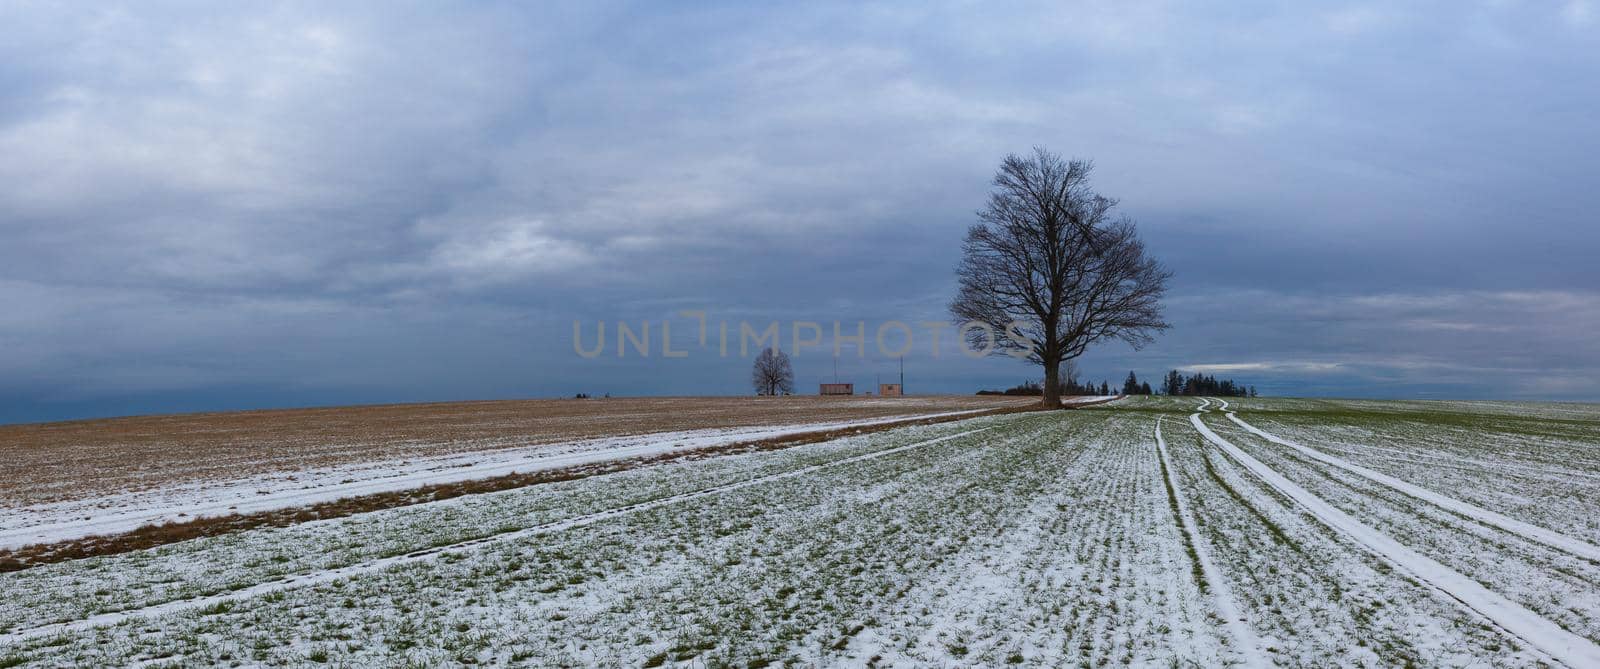 Lonely tree on the empty field in the winter evening.